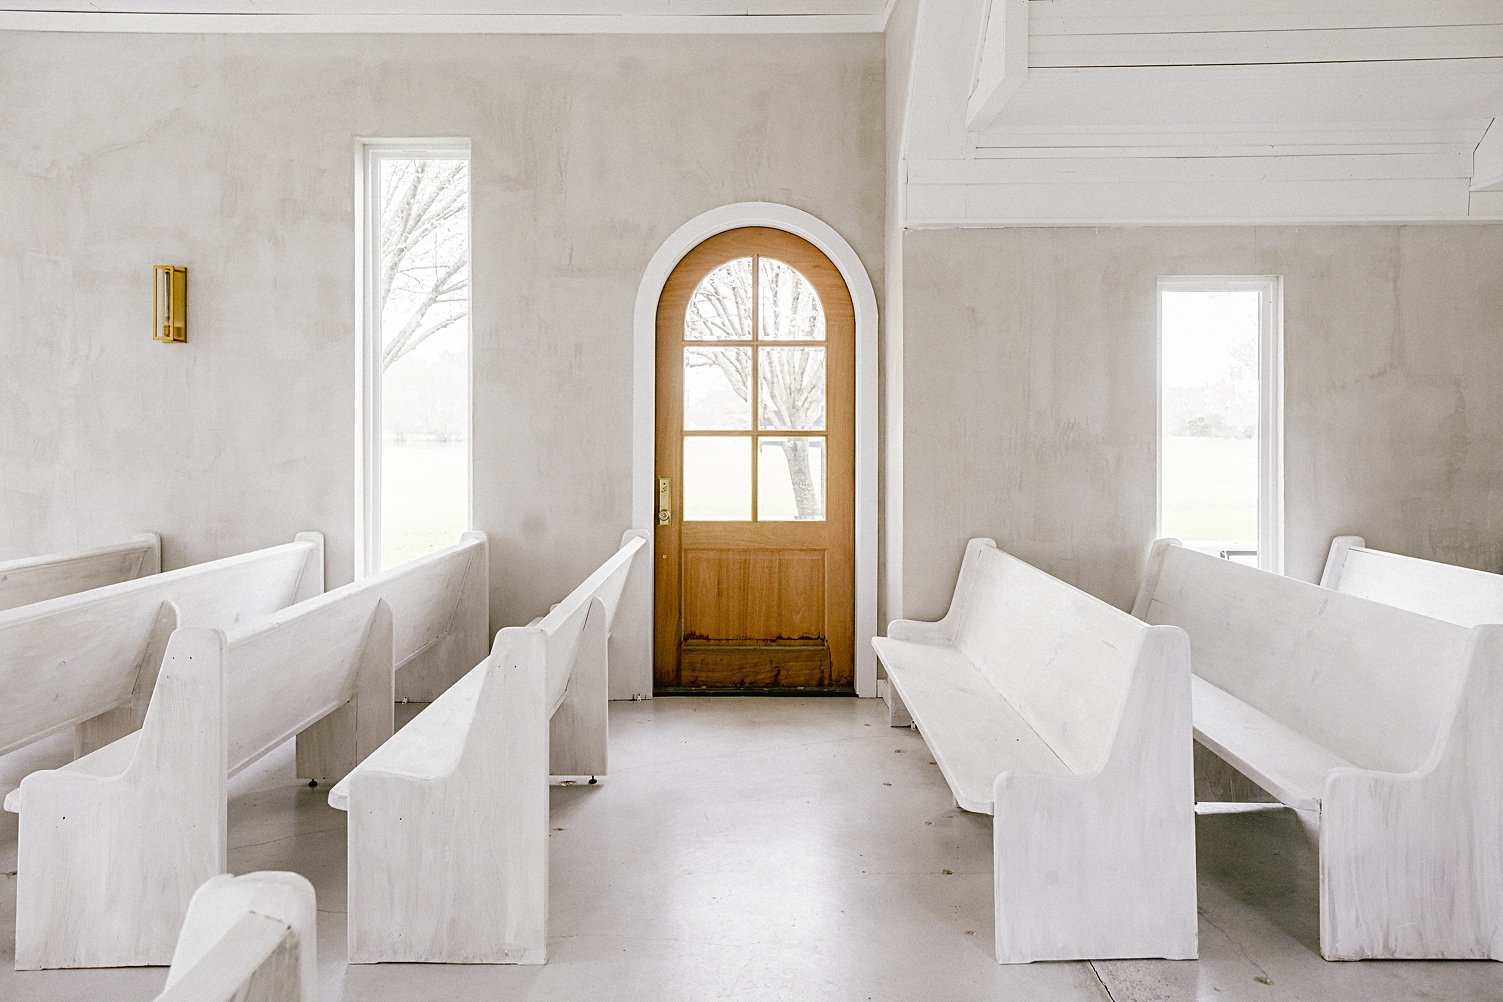 Emerson Venue chapel Leanne Ford Interiors restored by